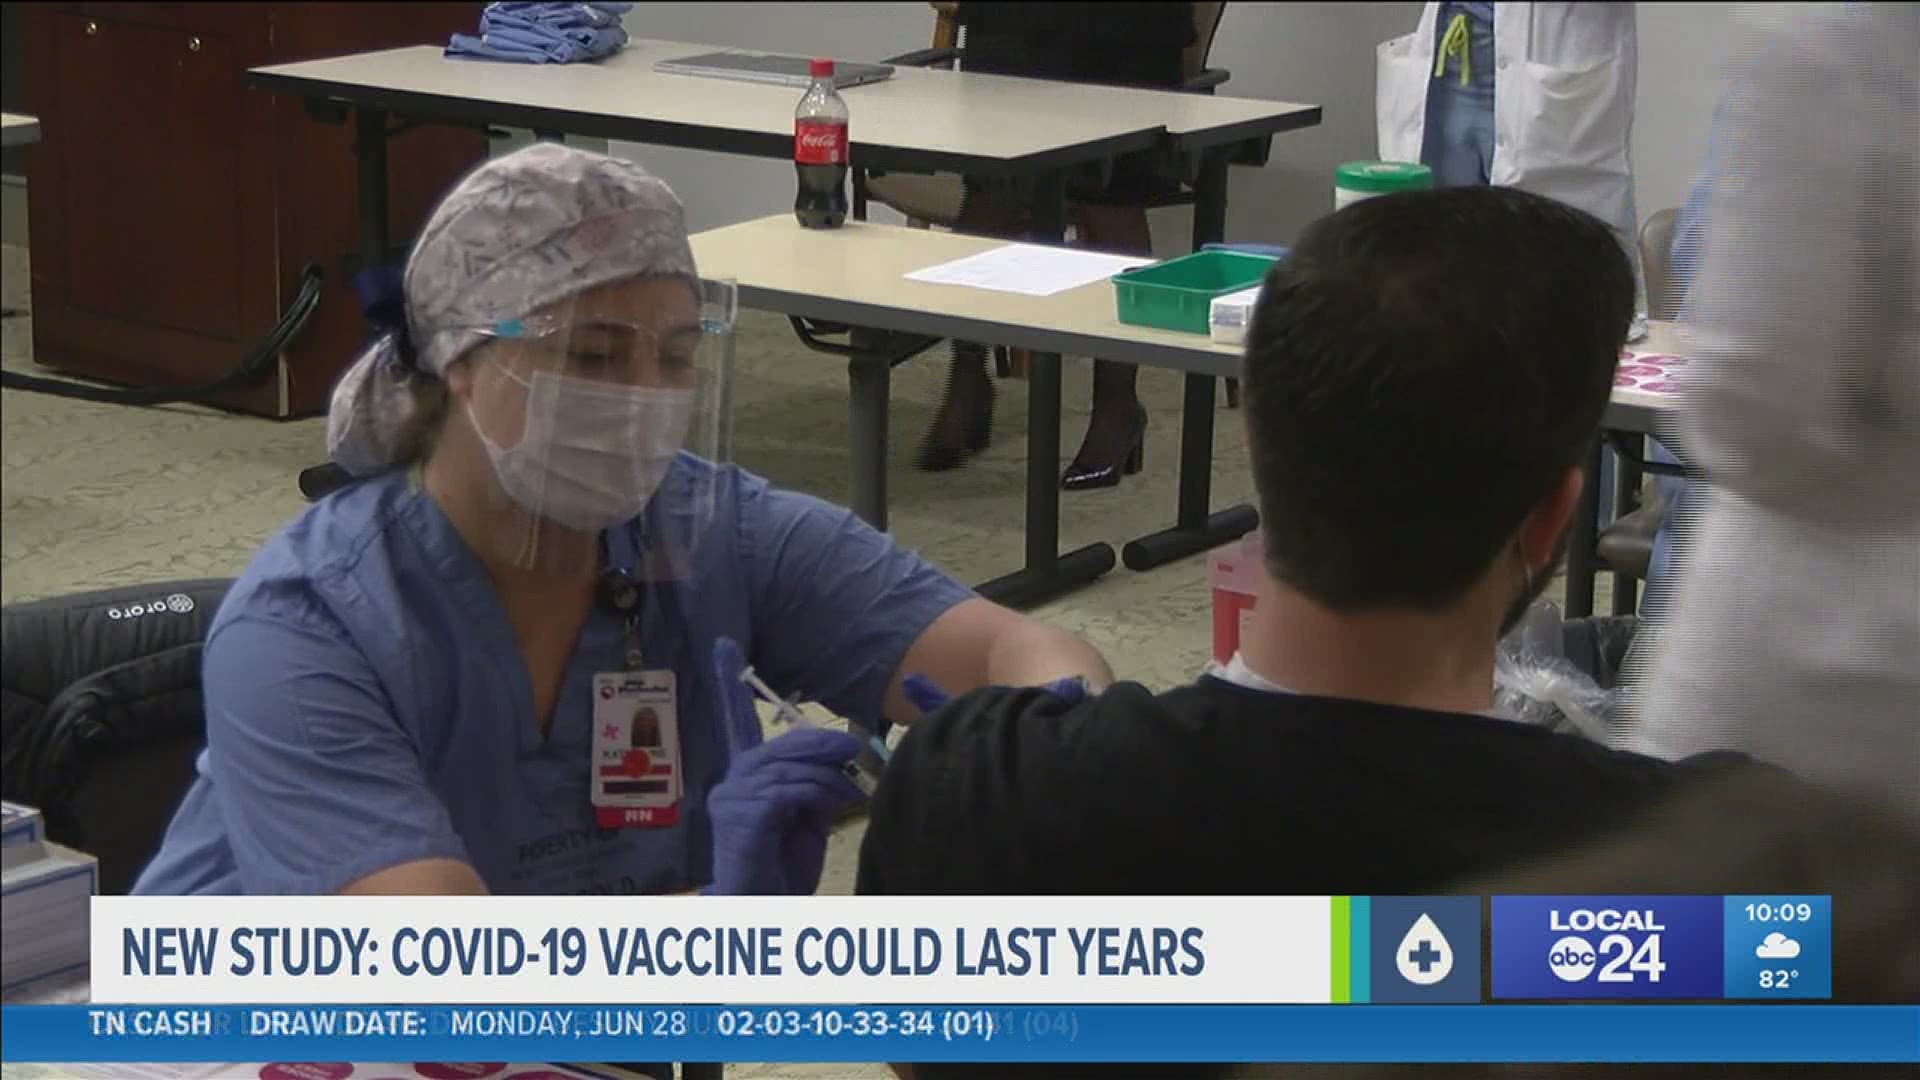 New medical study says COVID-19 vaccine could protect against the virus for years in some people.